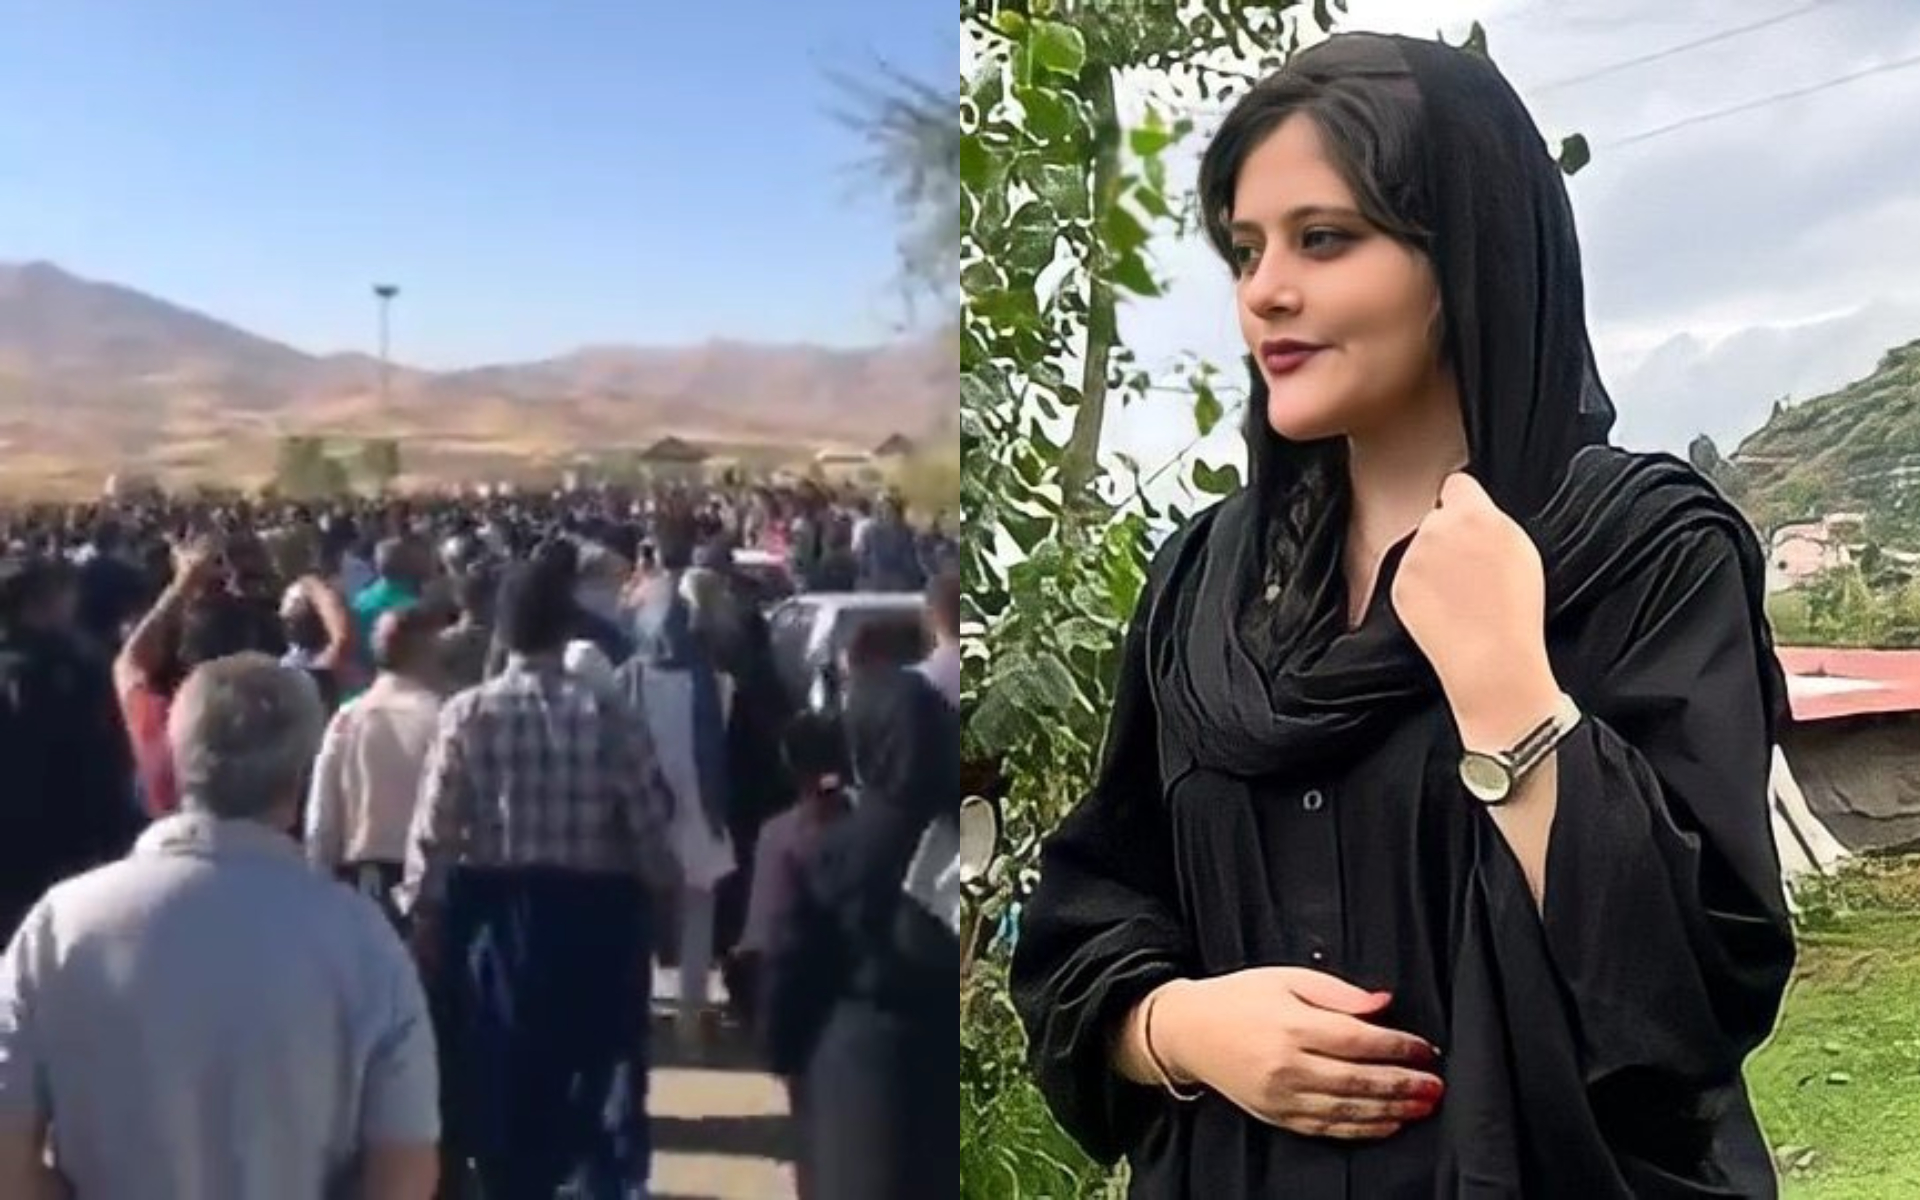 Protesters chant in the Iranian city of Saqez, following the burial of Mahsa Amini (right), who died following her arrest by the so-called morality police, September 17, 2022. (Screenshot: Twitter; courtesy)